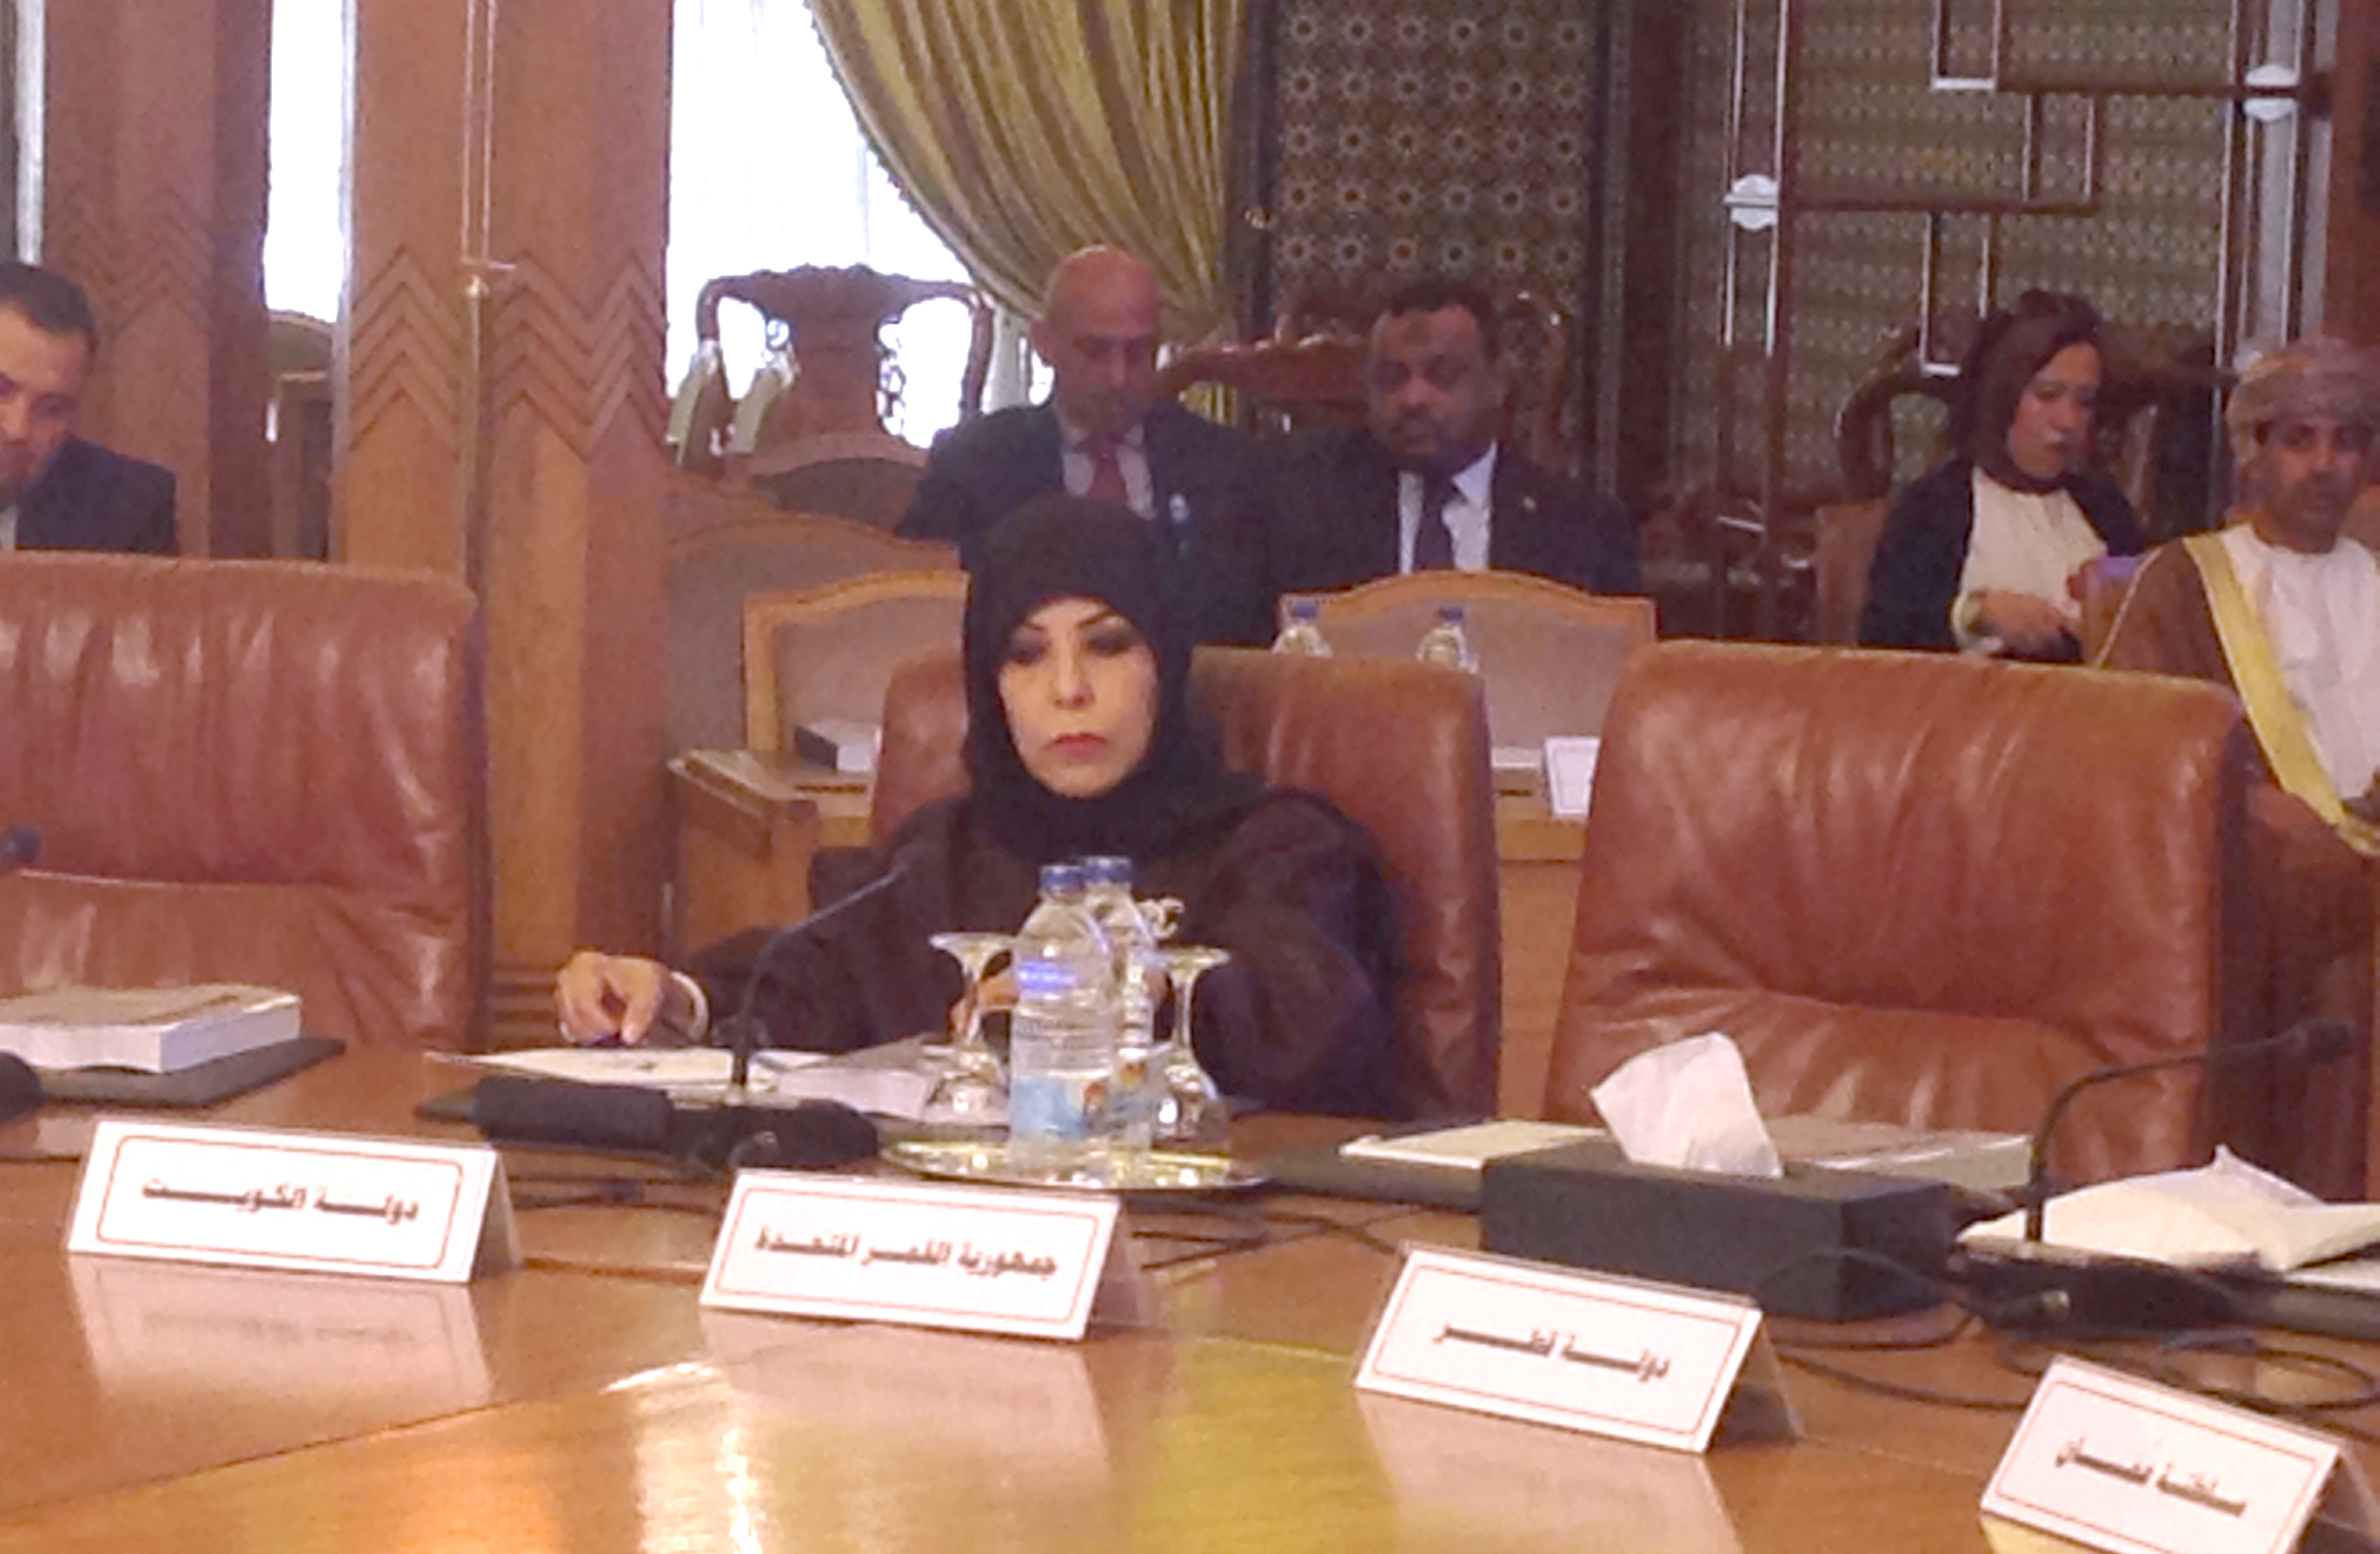 Head of the Arab countries media at the Ministry of Information Lulwa Abdullah Al-Salem